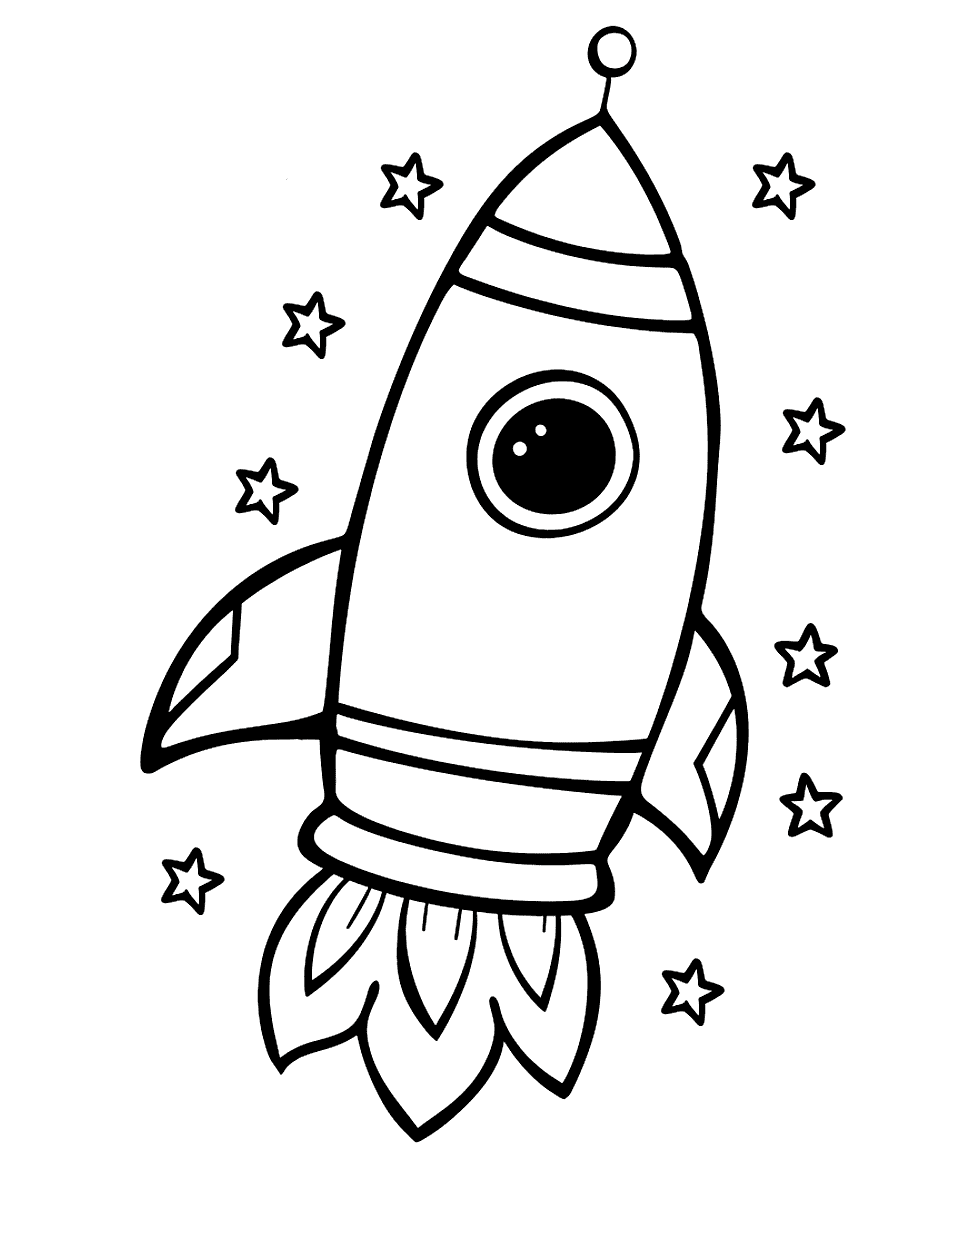 Space Rocket Launch Toddler Coloring Page - A rocket blasting off into space, with stars in the background.